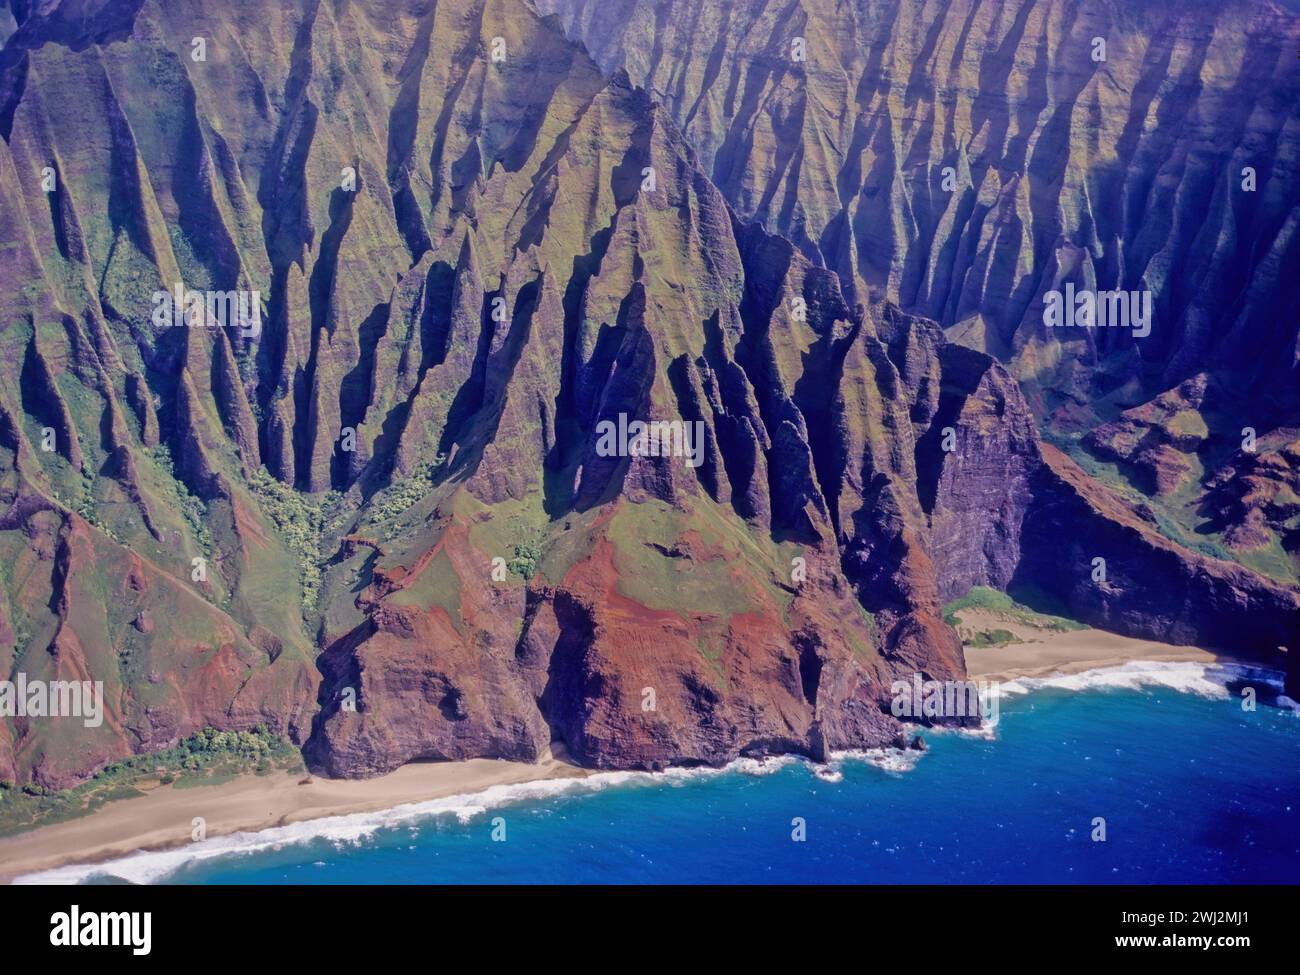 Nā Pali Coast State Park is a 6,175-acre state park in the U.S. state of Hawaii, located in the center of the rugged 16-mile (26 km) northwest side of Stock Photo